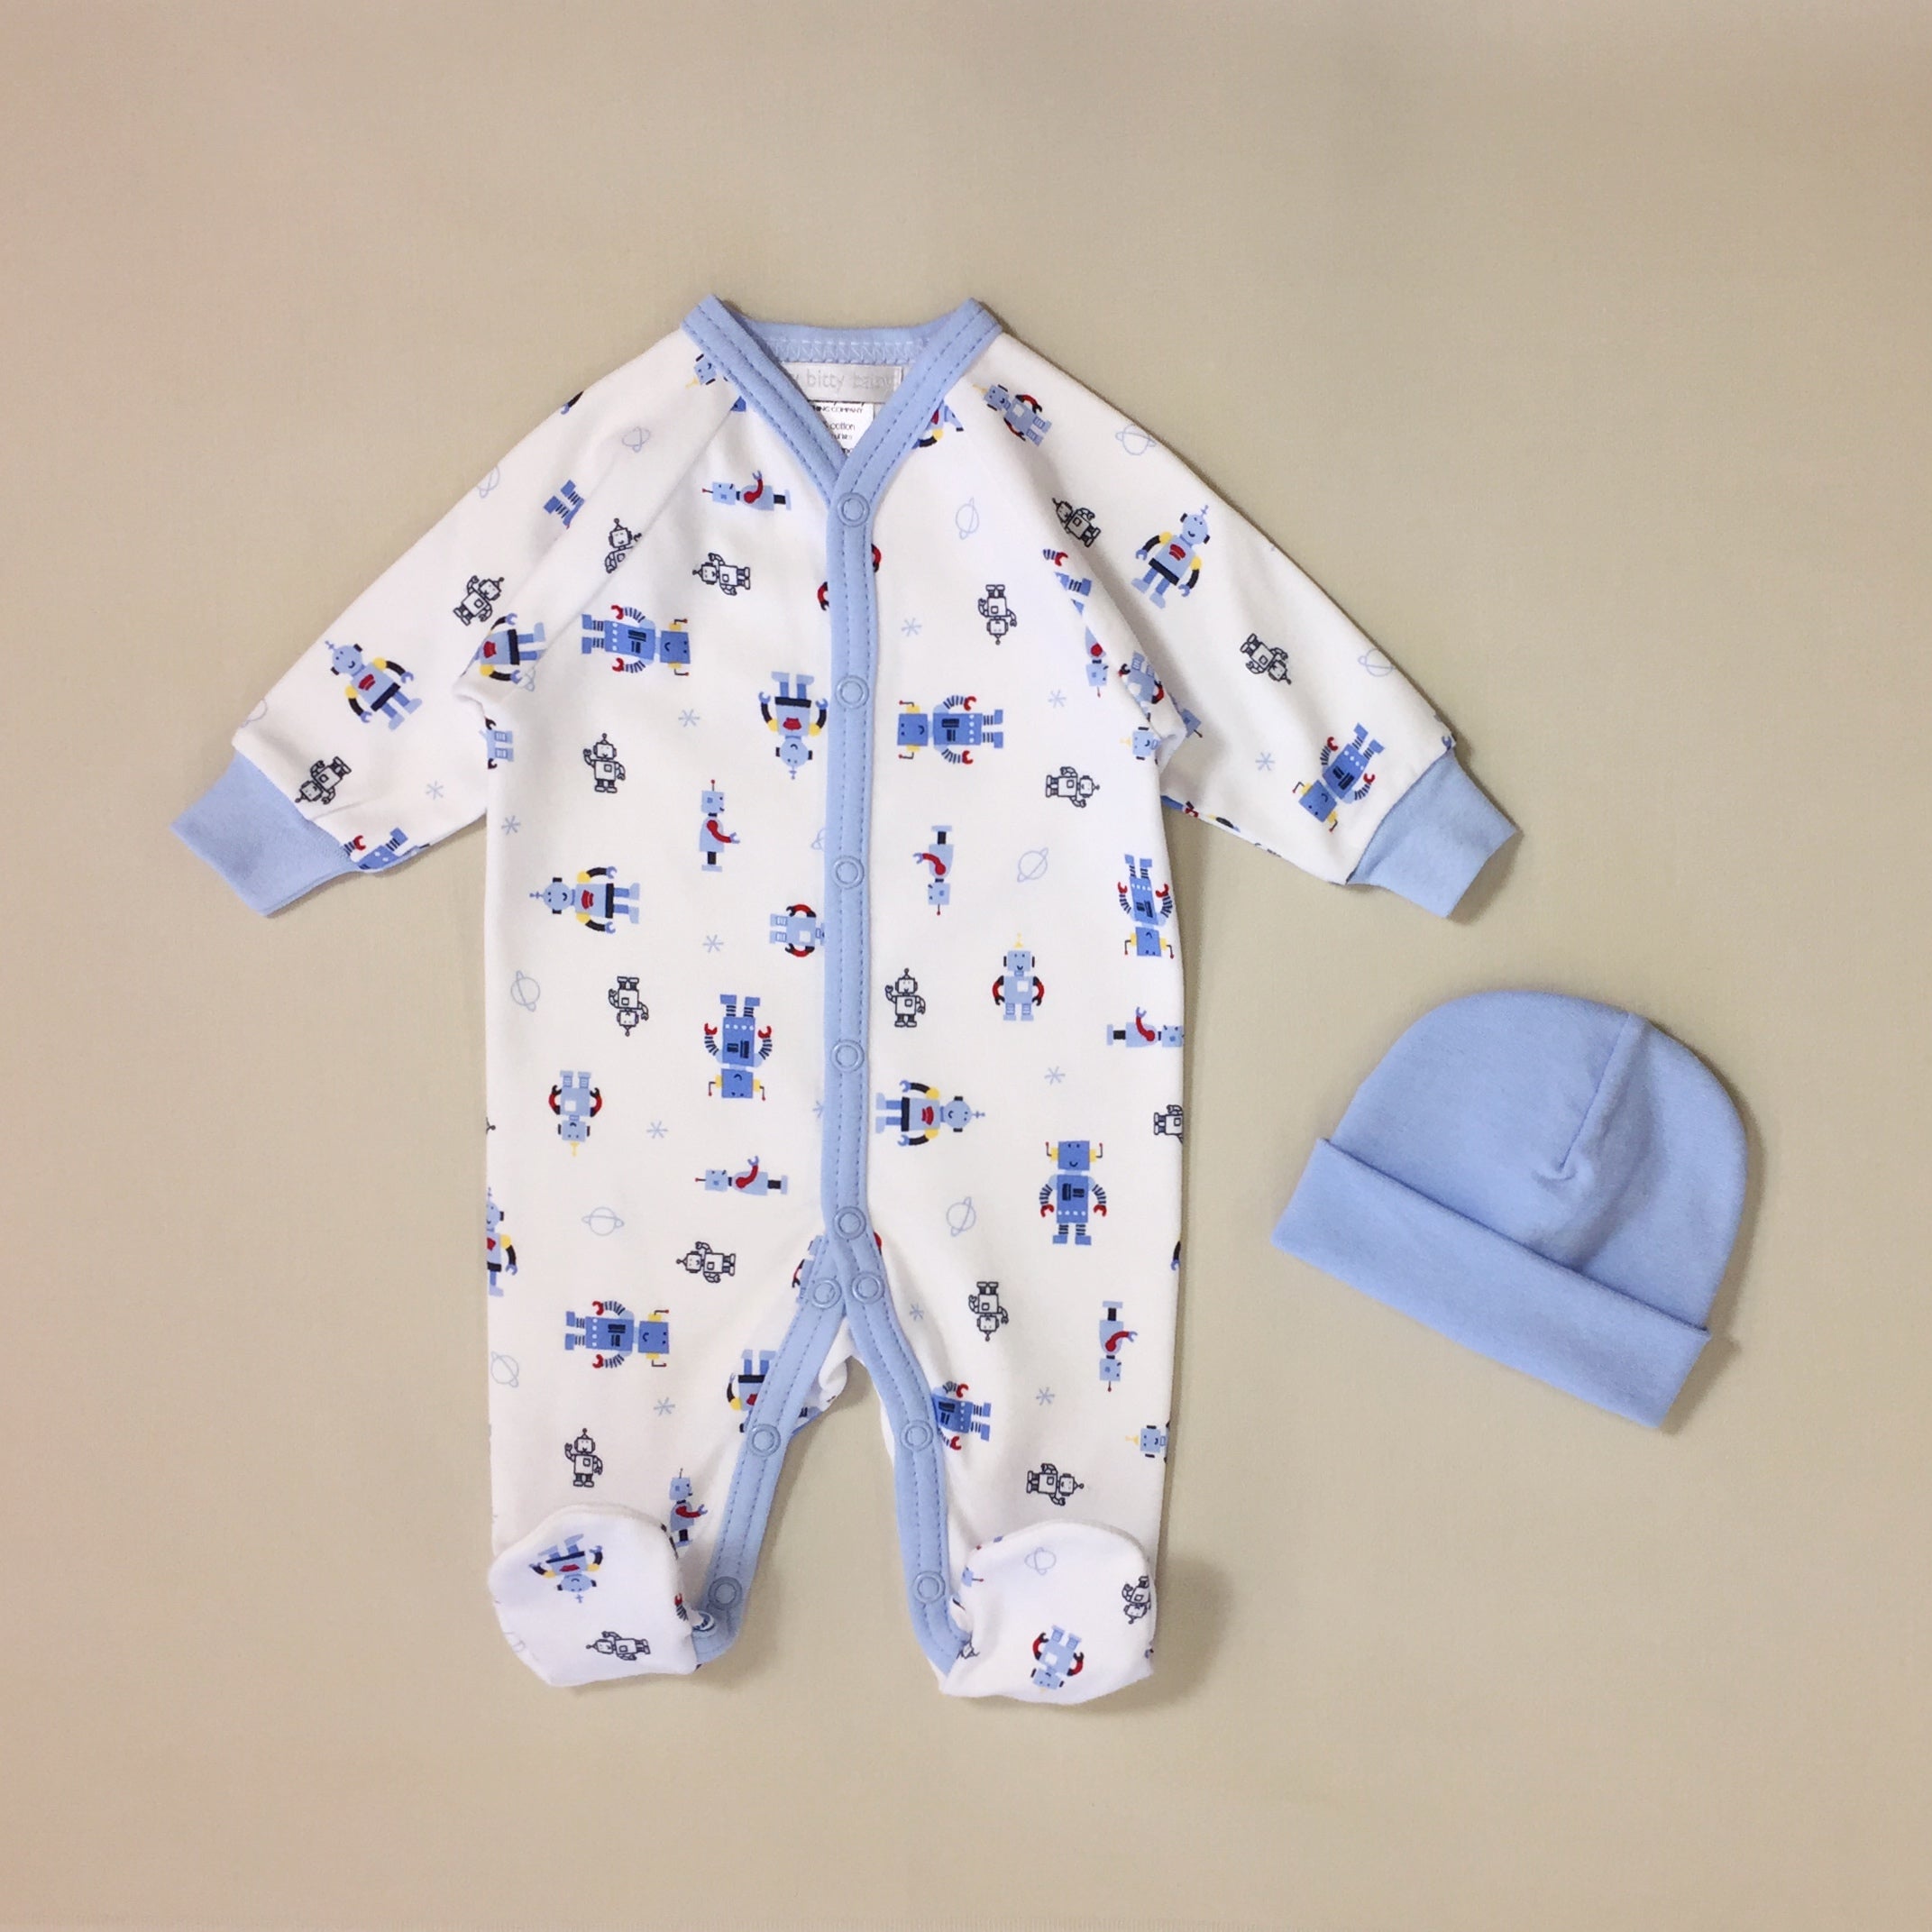 White Babygrow Set With Robot Print, Blue Stripe And Matching Blue Hat